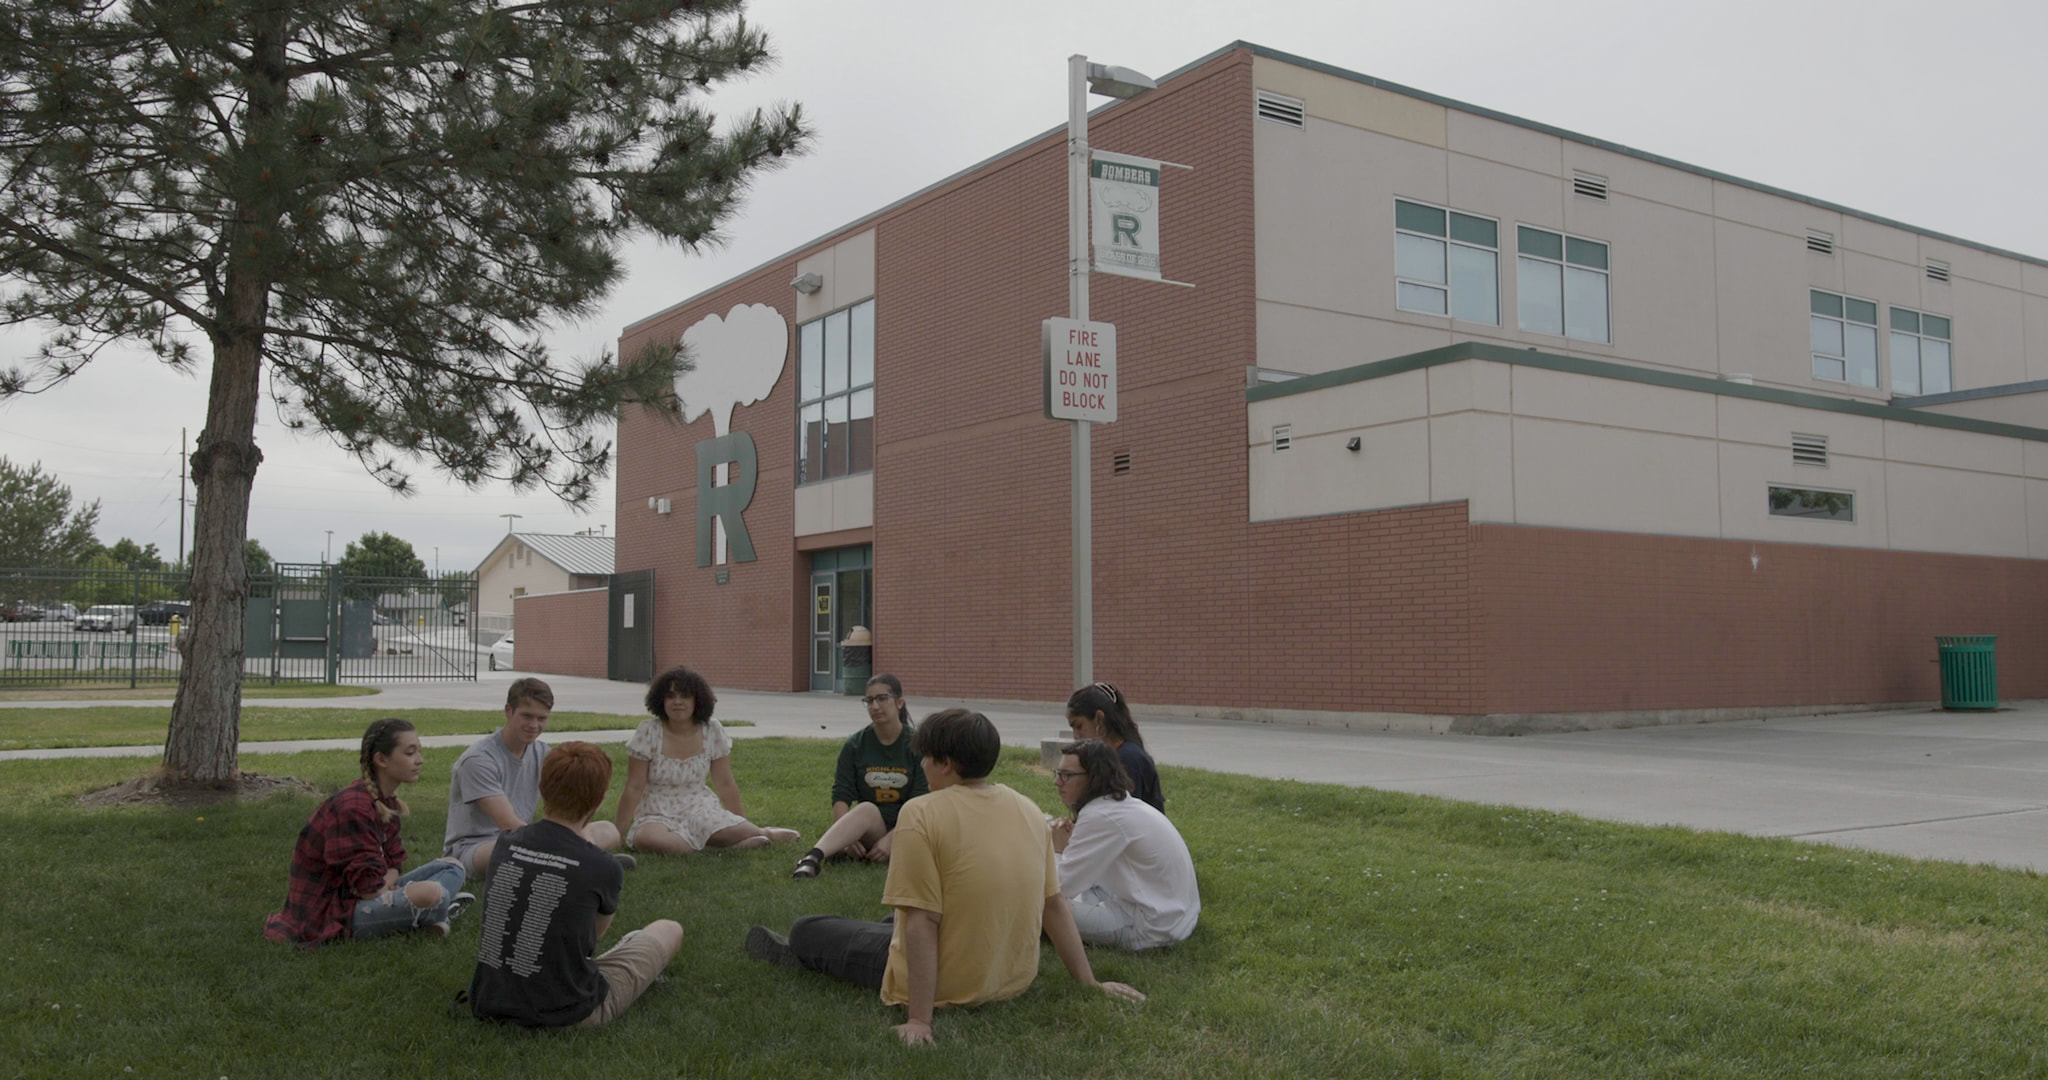 A group of students sitting on the grass in front of a school building in Richland, with an atomic cloud mural on the wall.